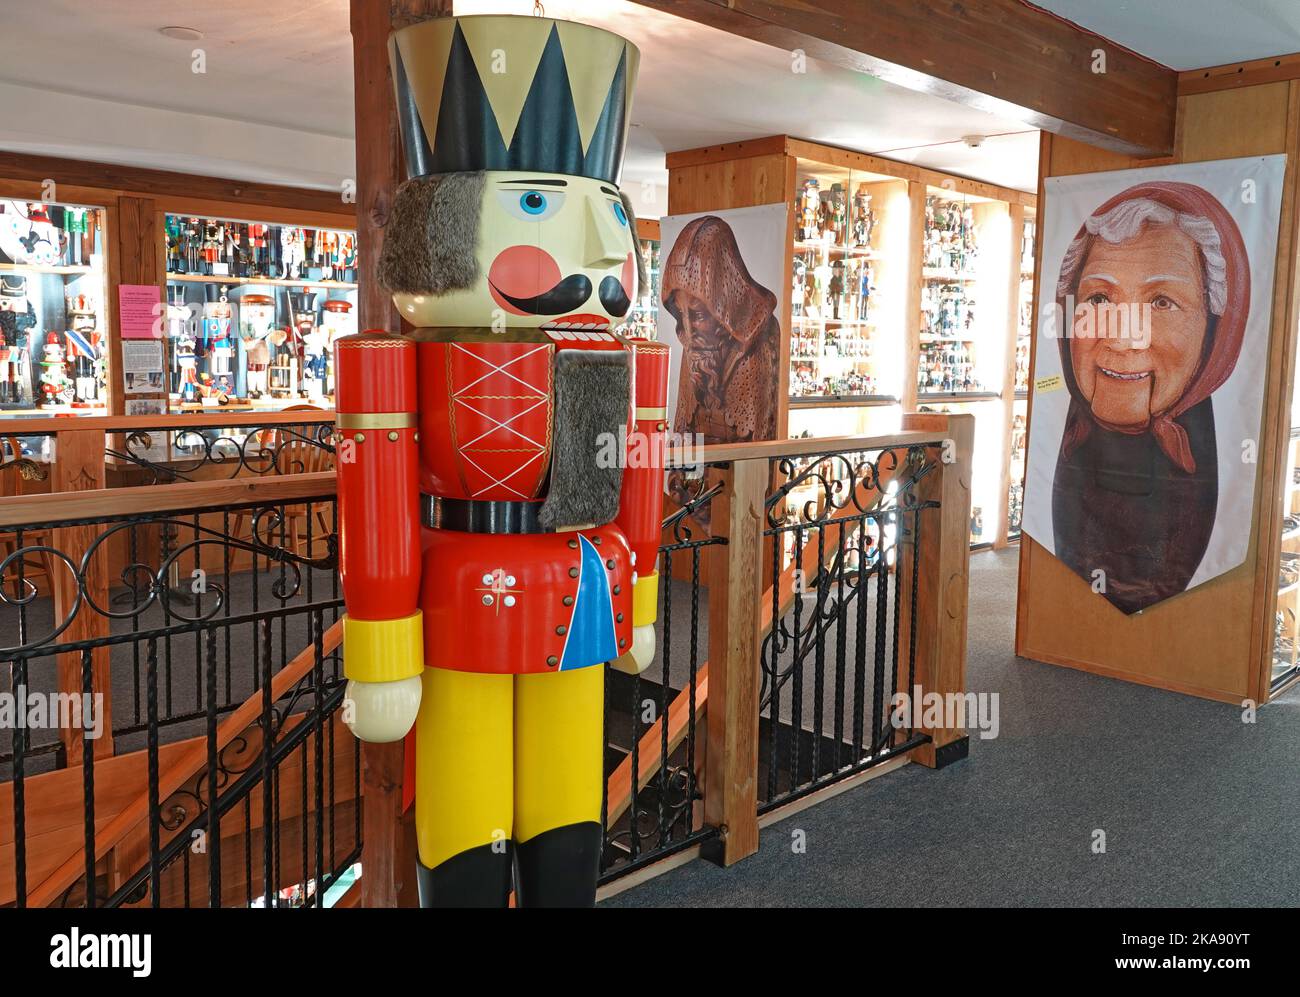 The world-famous Nutcracker Museum in Leavenworth, Washington, holds the world's largest collection of authentic German nutcrackers. Stock Photo